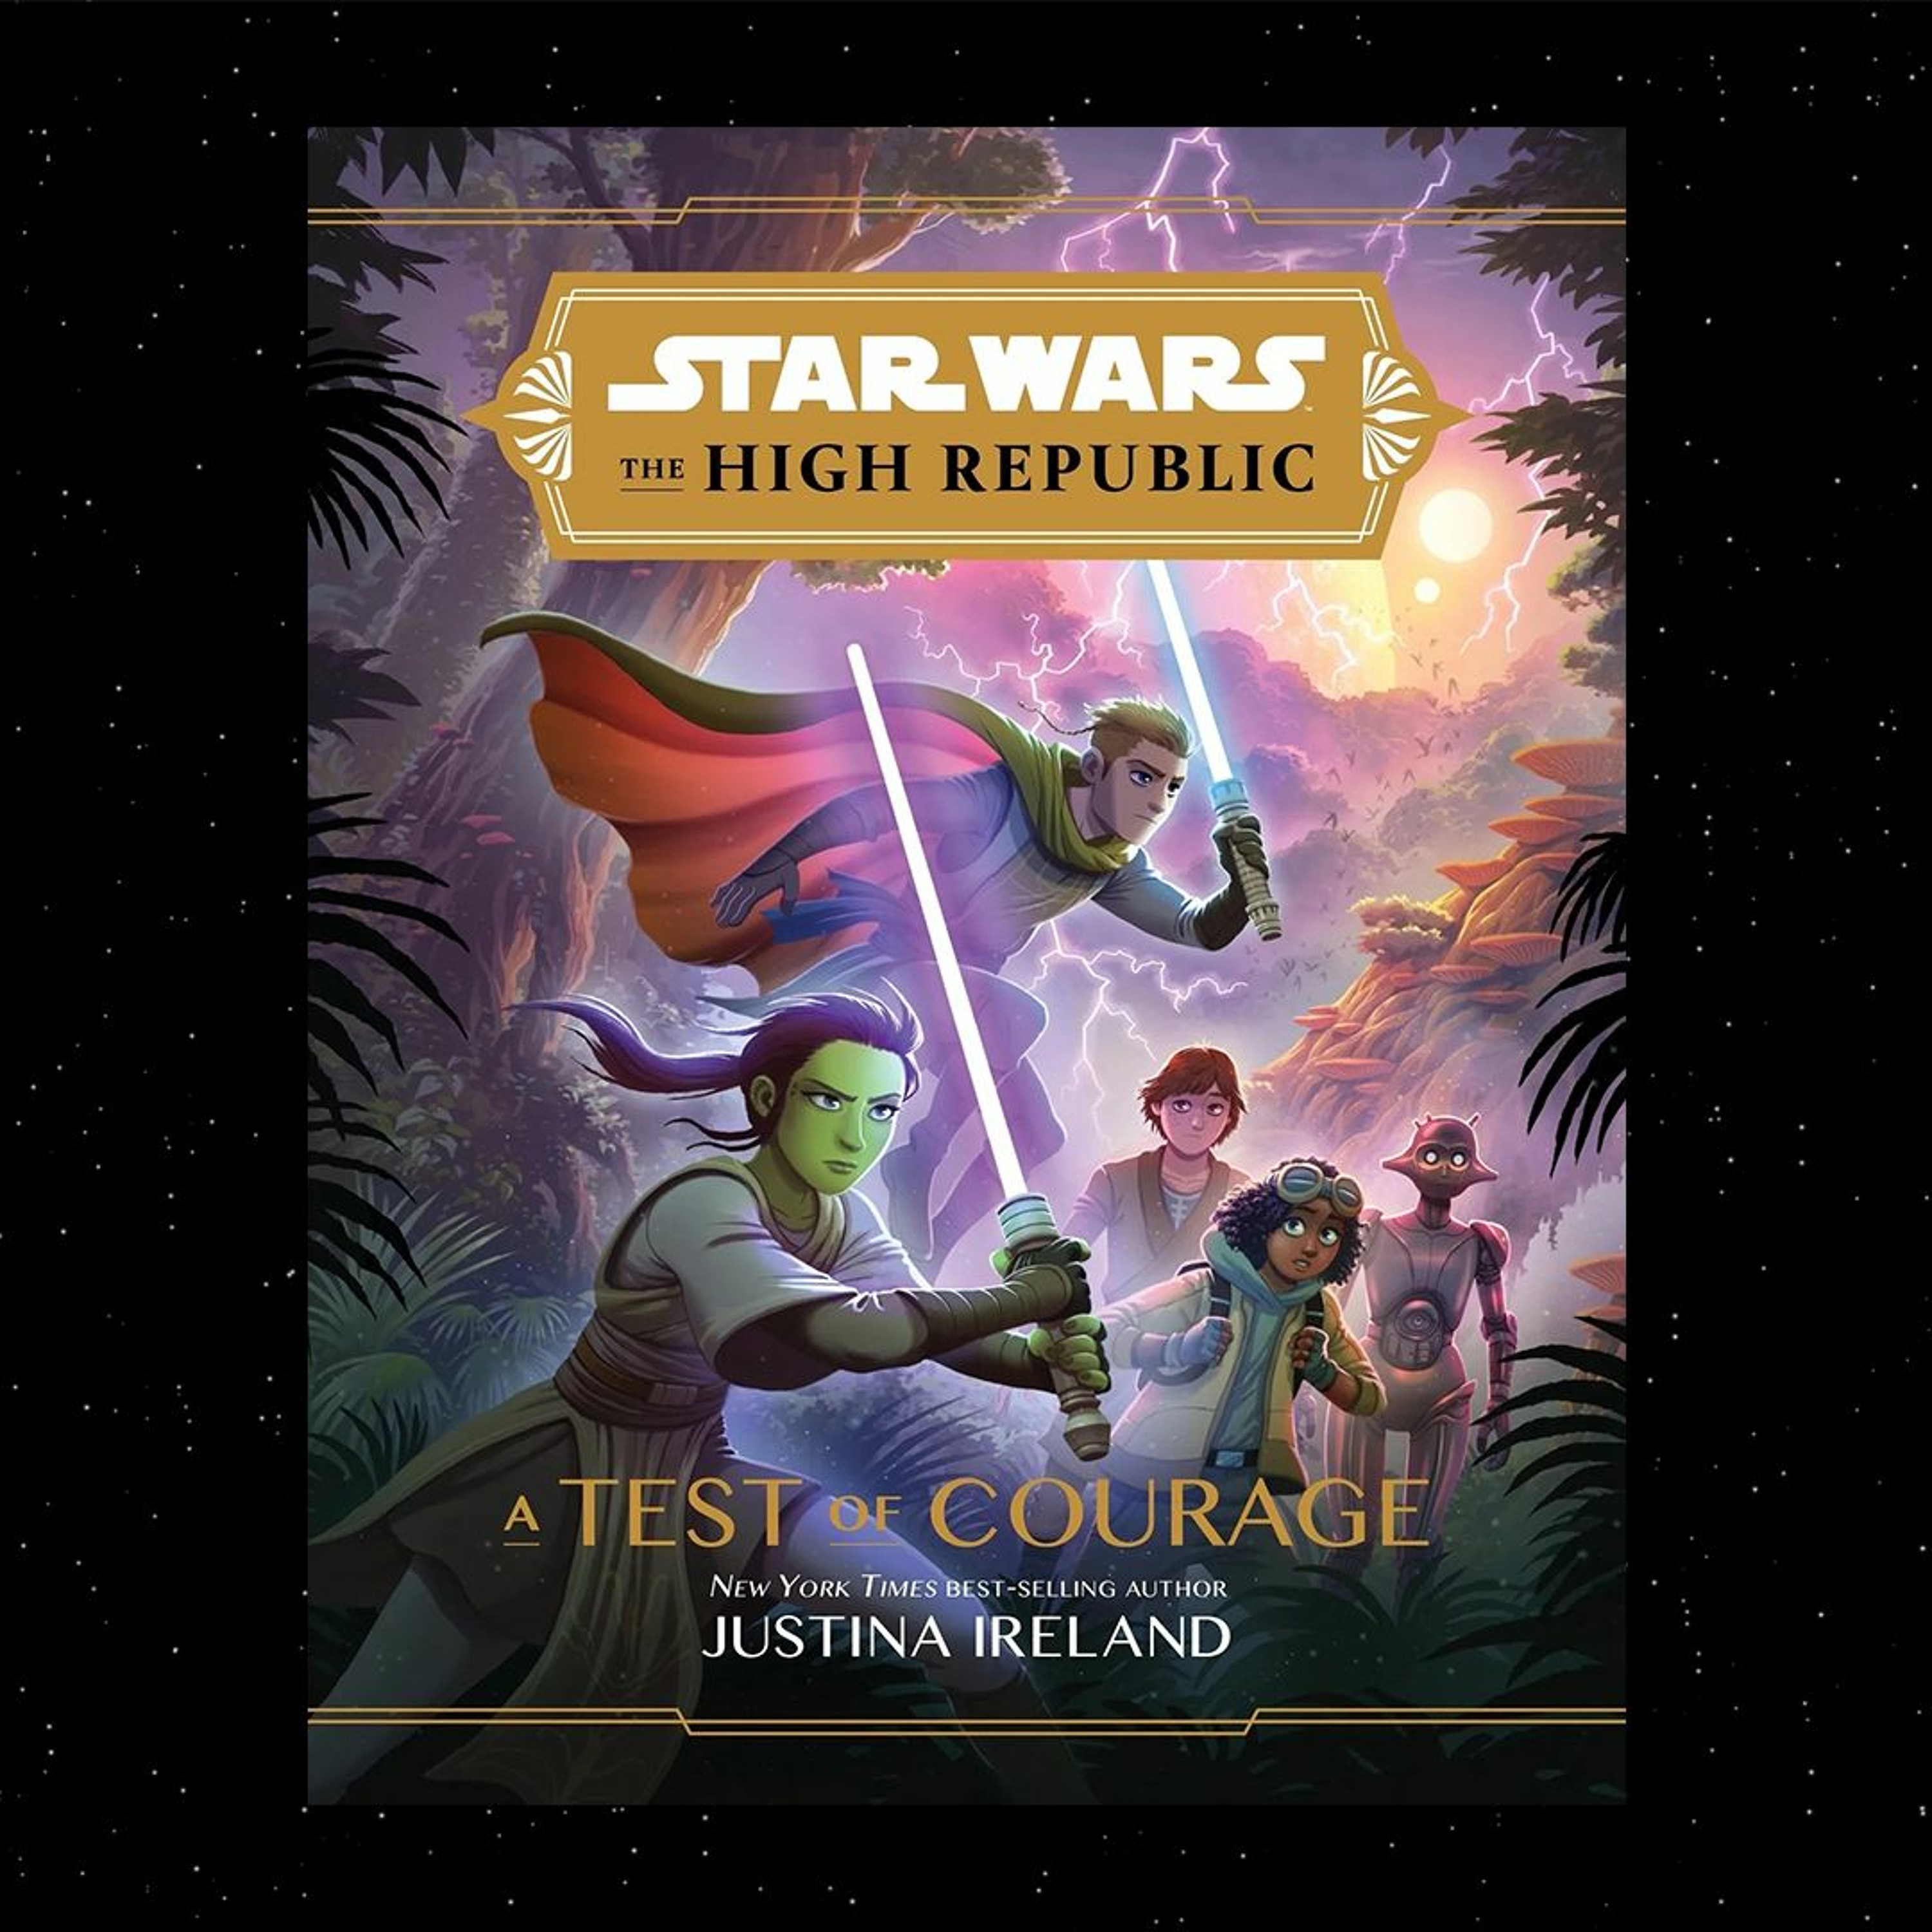 A Test of Courage - The Hatchet of Star Wars? #SWPD2021